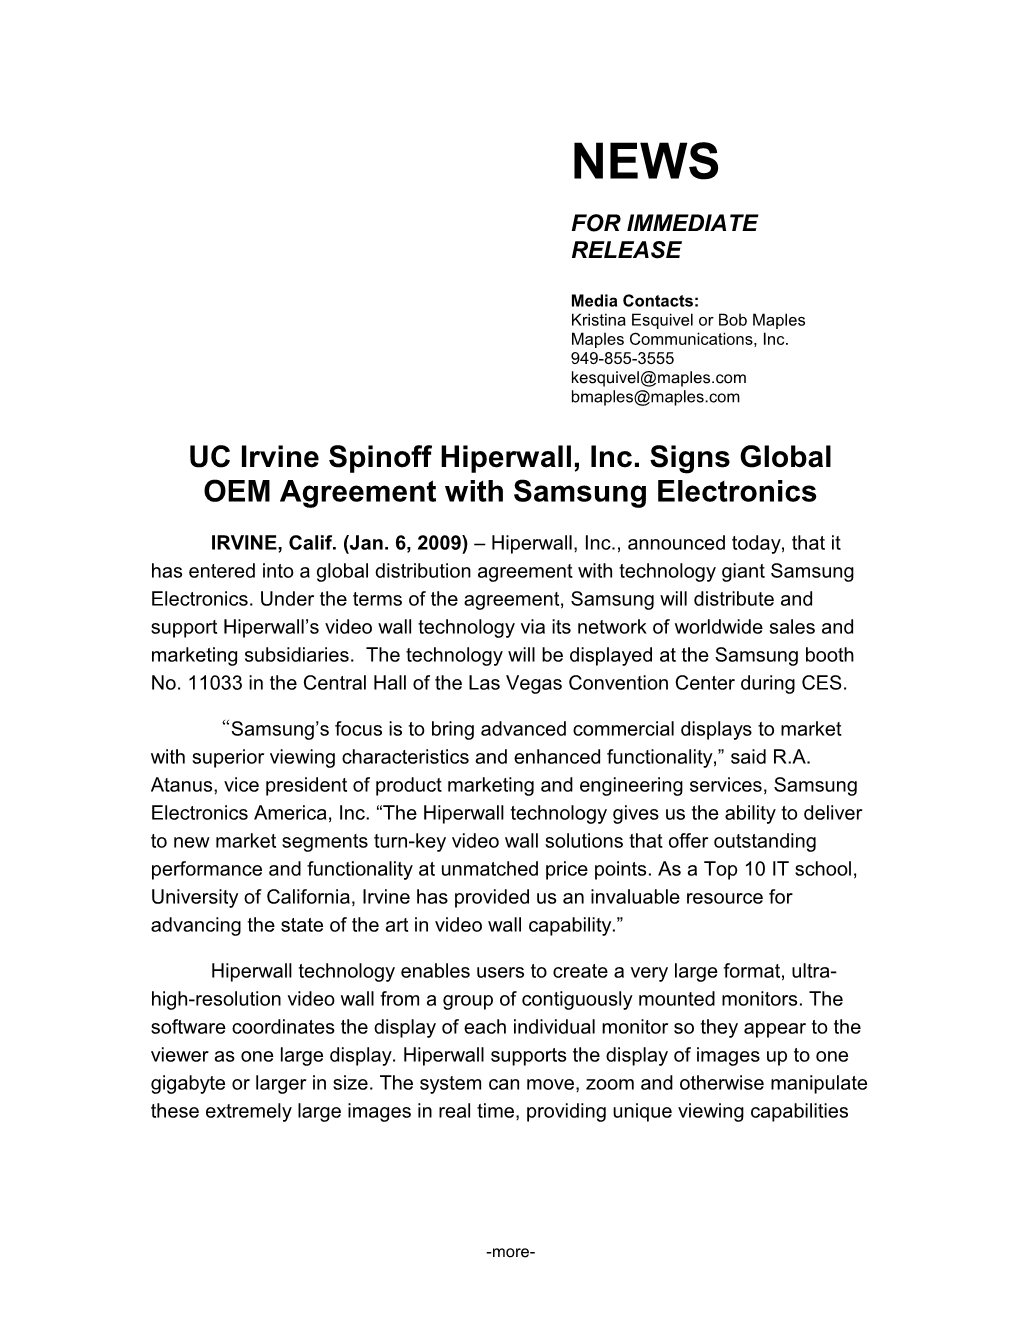 UC Irvine Spinoff Hiperwall, Inc. Signs Global OEM Agreement with Samsung Electronics